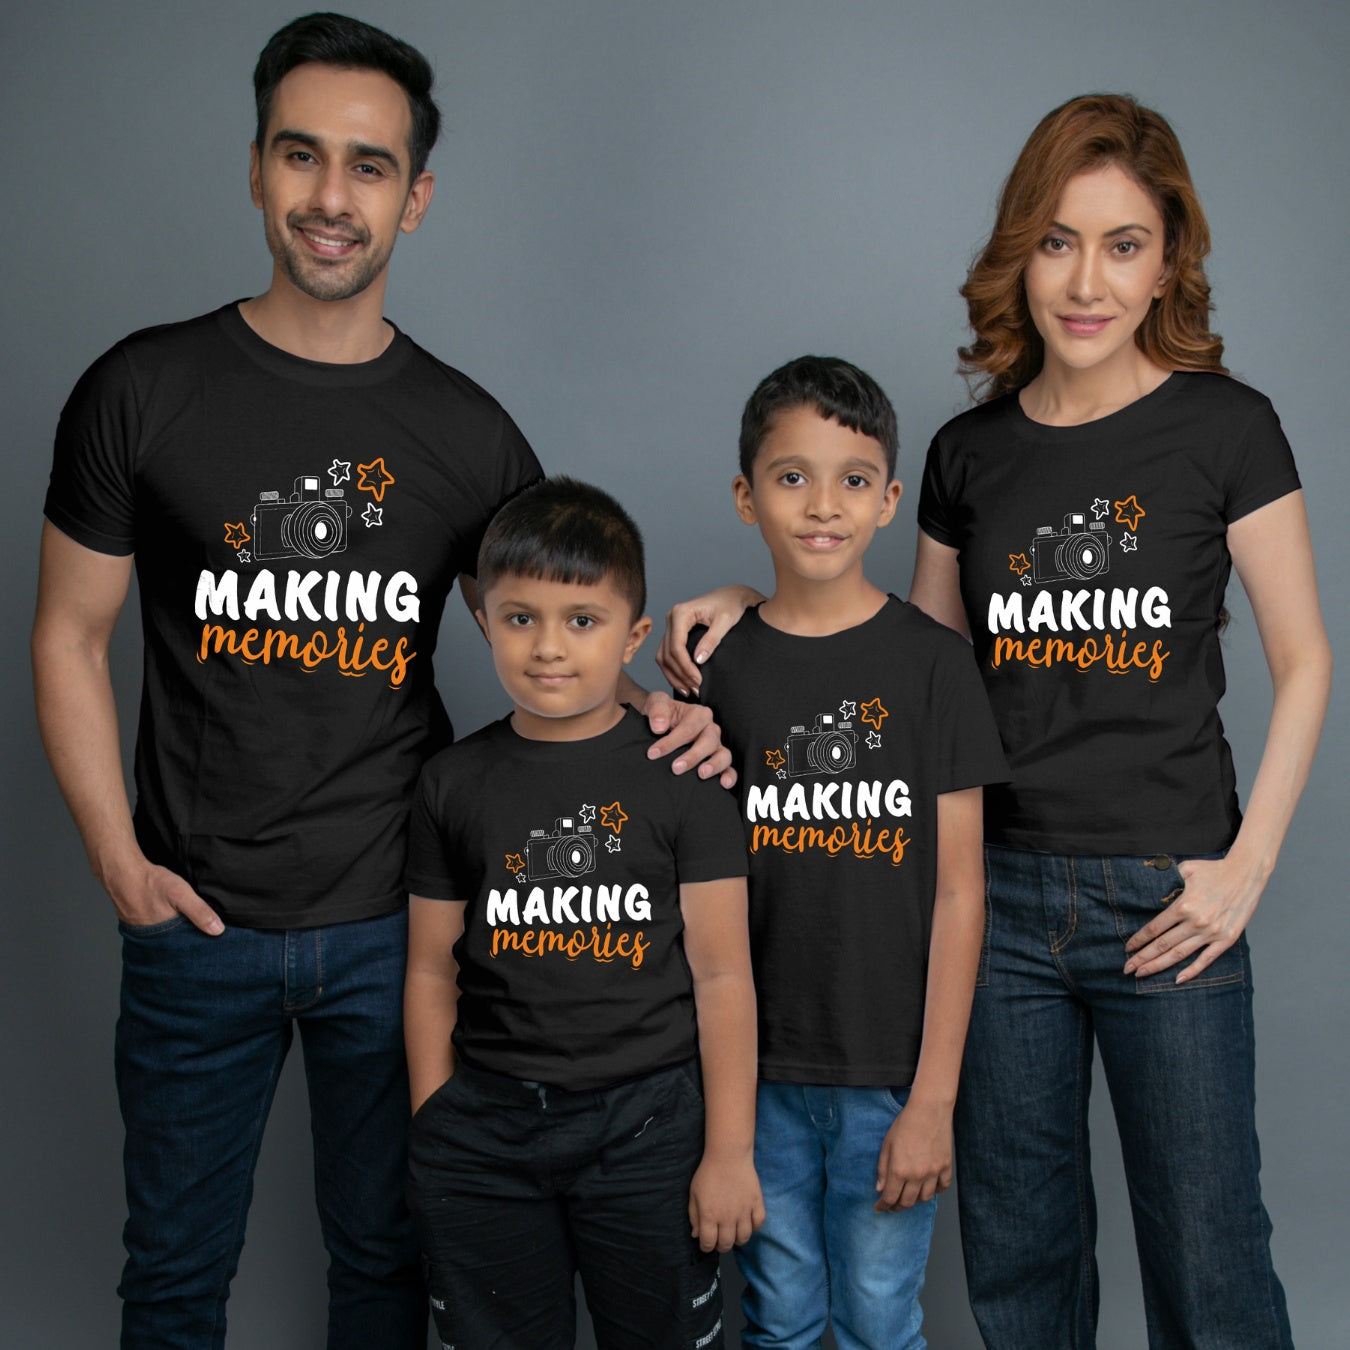 Family t shirts set of 4 Mom Dad Two Sons in Black Colour - Making Memories Variant